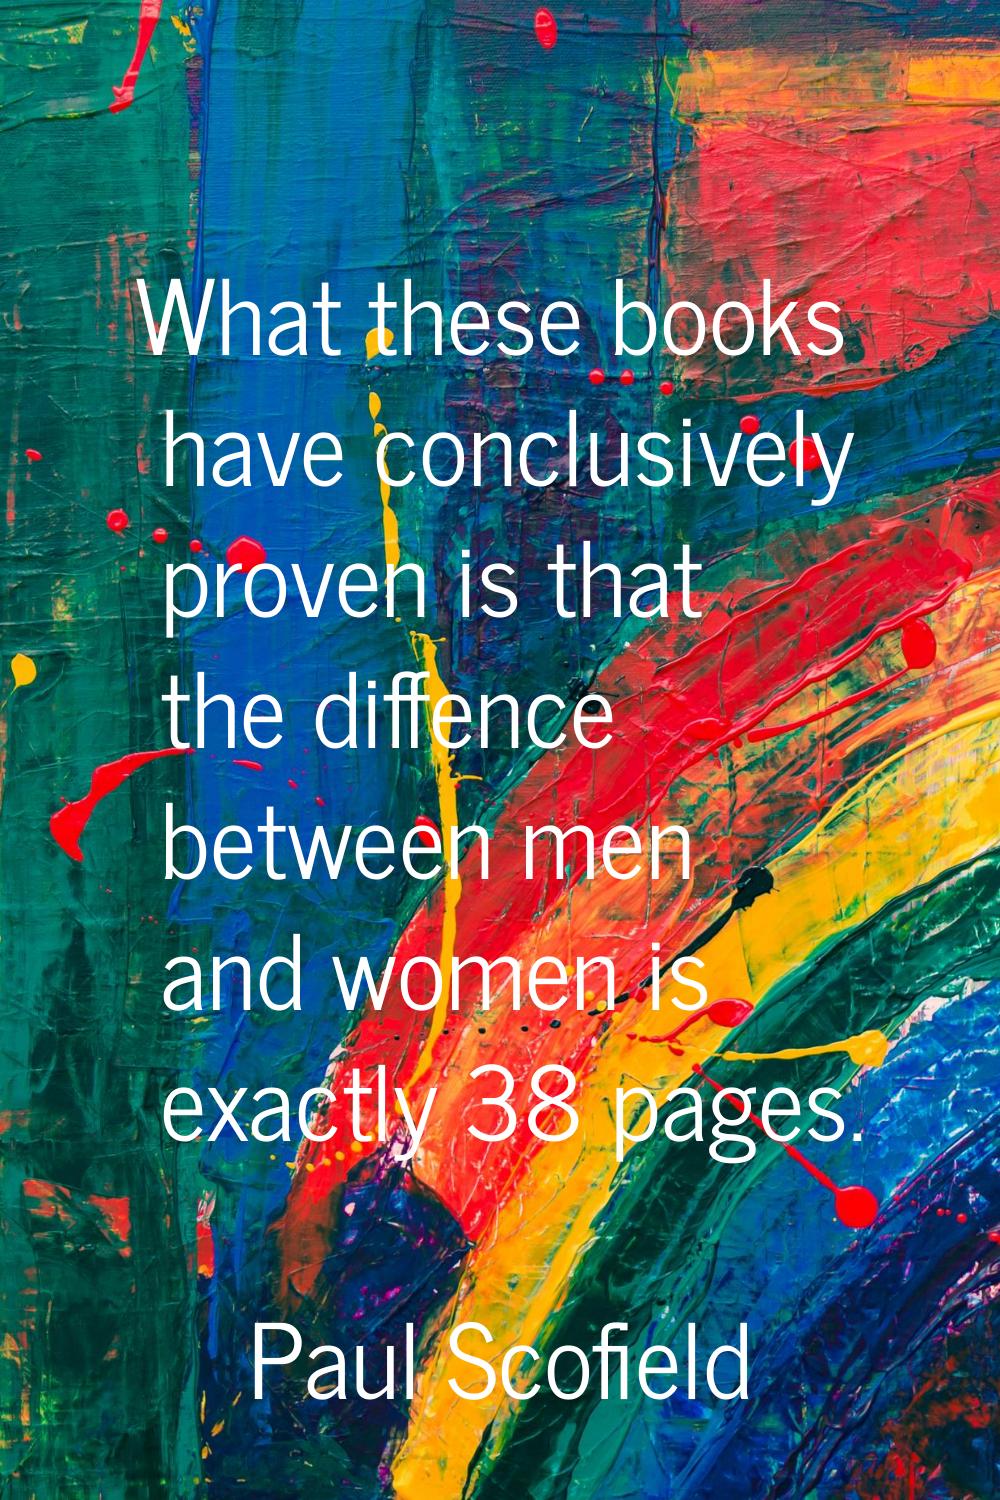 What these books have conclusively proven is that the diffence between men and women is exactly 38 